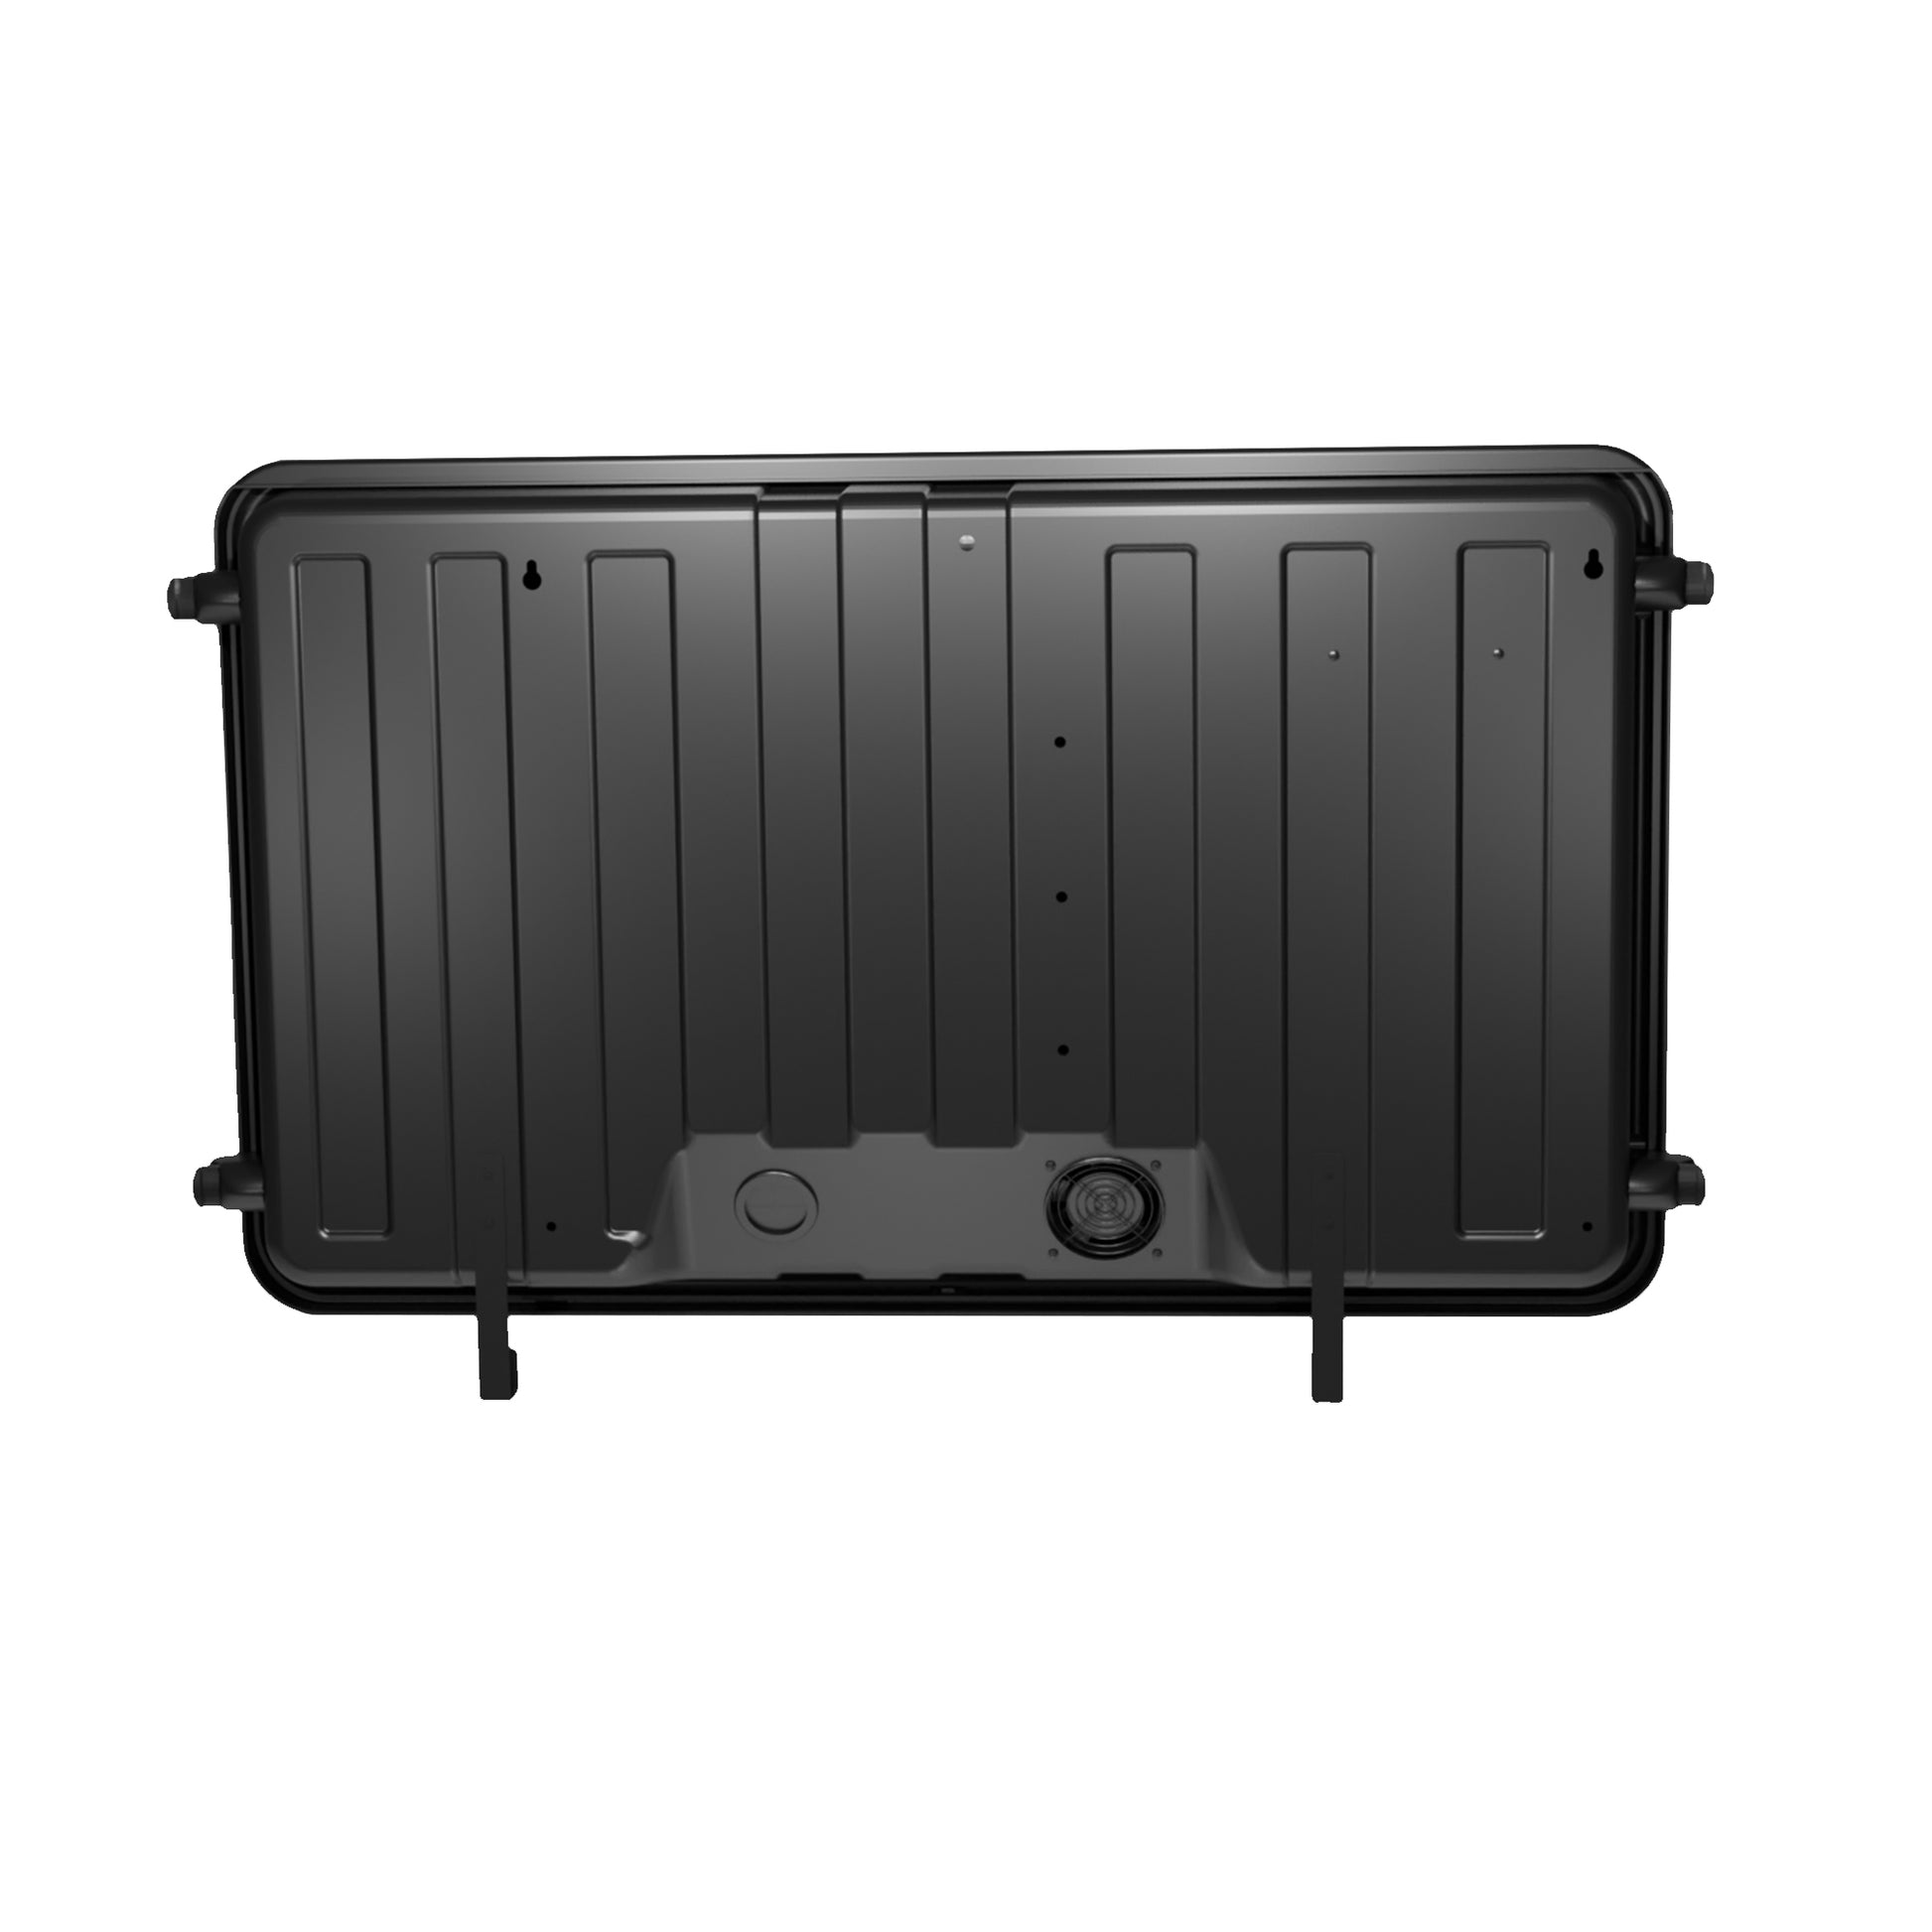 Storm Shell Outdoor Weatherproof TV Enclosure  with ariticulating arm and mounting hardware. Fits up to 44" TV  back view